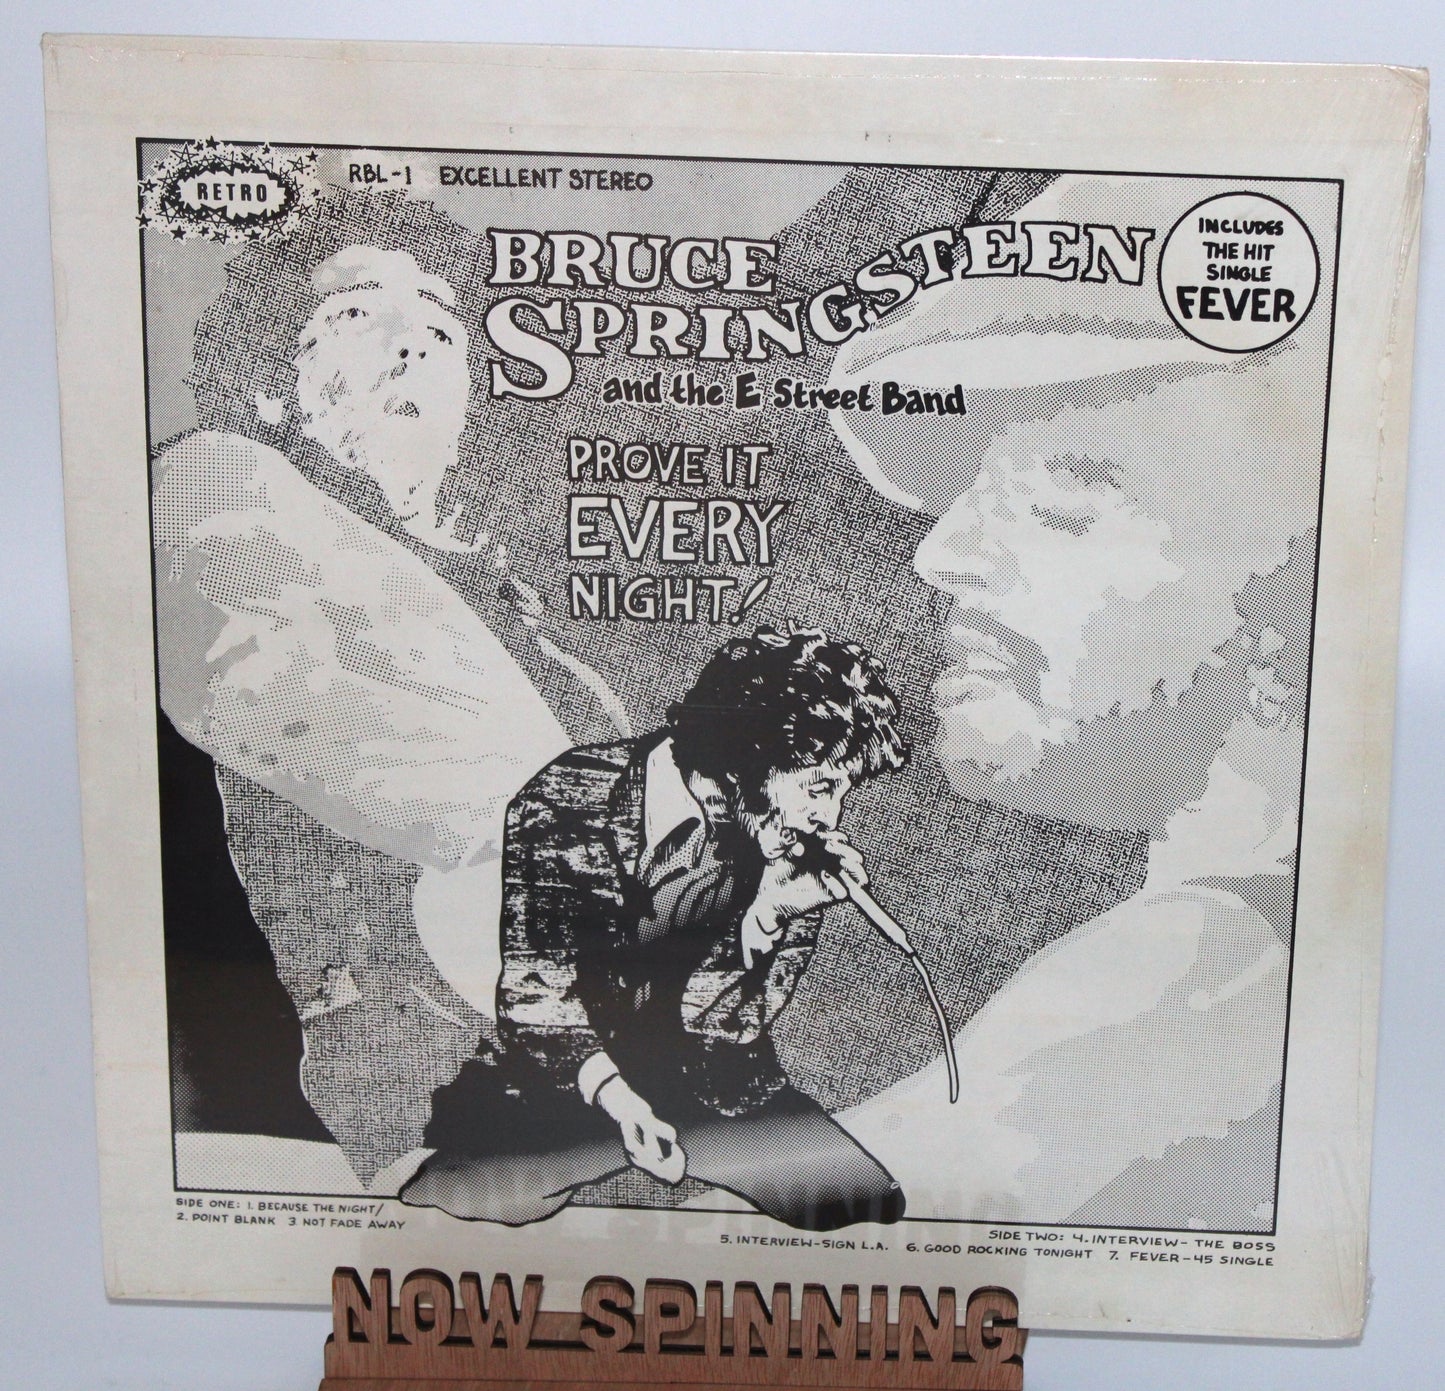 Bruce Springsteen – SEALED - Prove It Every Night - Unofficial Vinyl - Near Mint - BLV